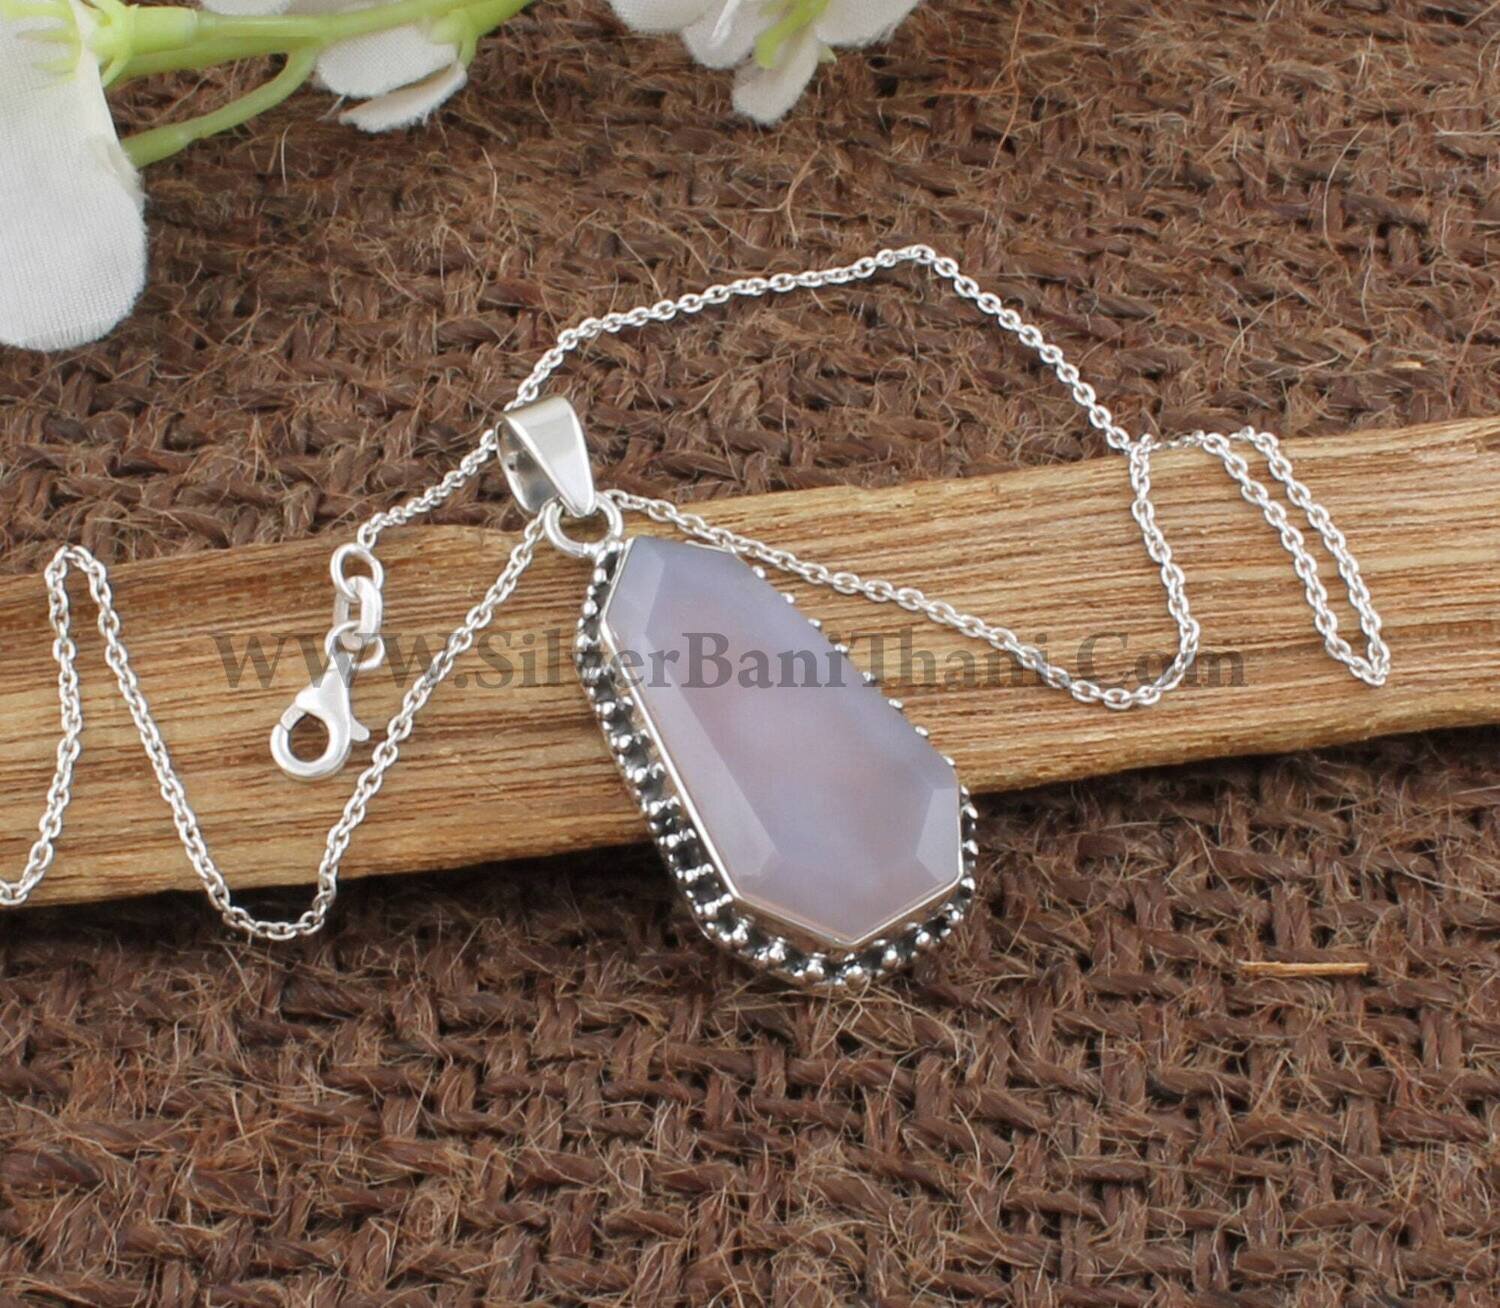 Natural Rose Quartz Necklace | 925 Sterling Silver Necklace | Fancy Shape Gemstone Pendant Necklace | Present For Her | Wedding Jewelry Gift